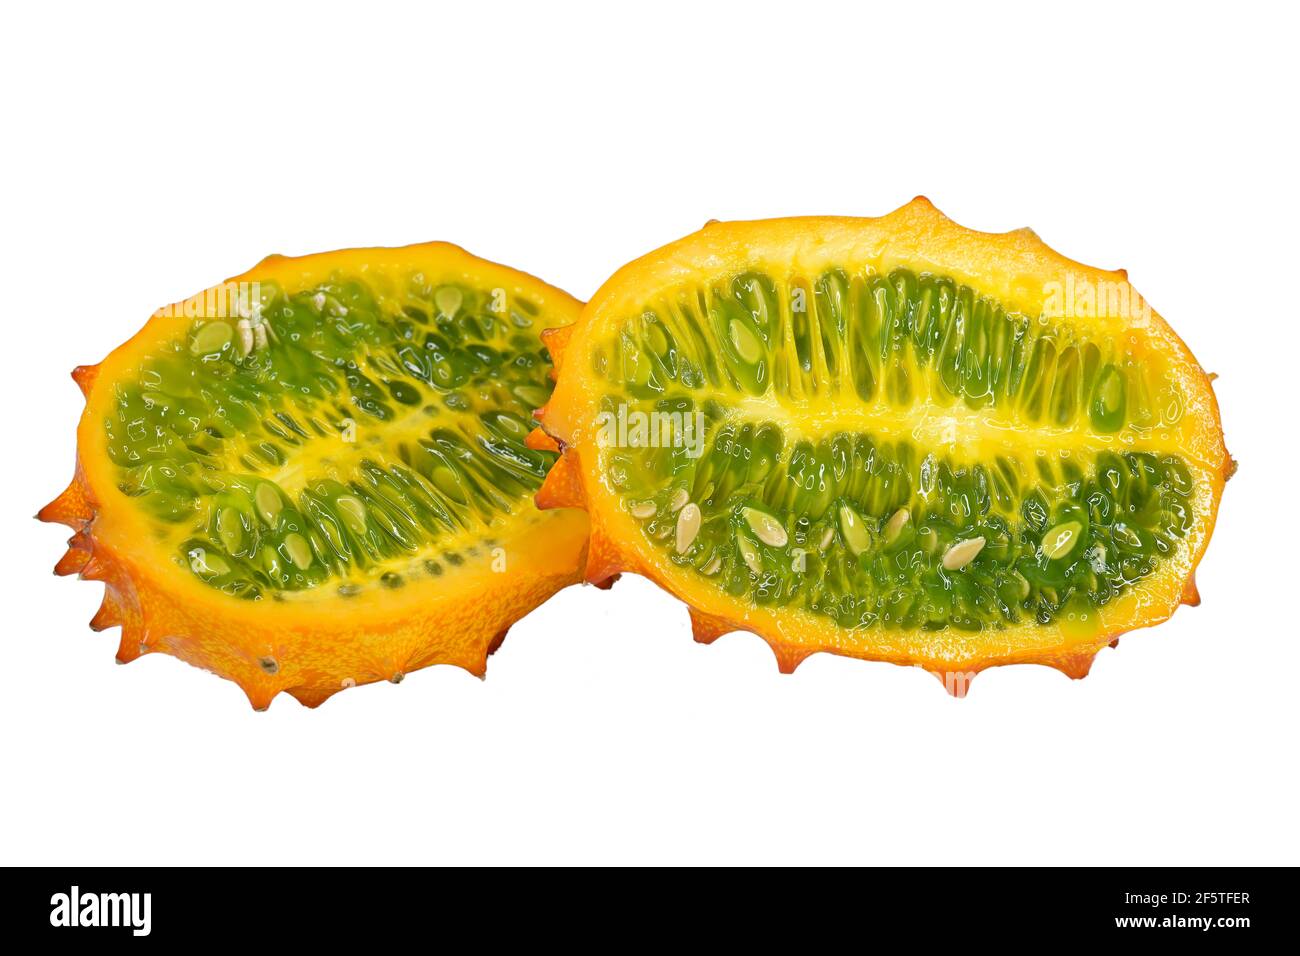 Close-up of a ripe Kiwano (Cucumis metuliferus) or Horned Melon fruit, sliced length-wise, isolated on white Stock Photo